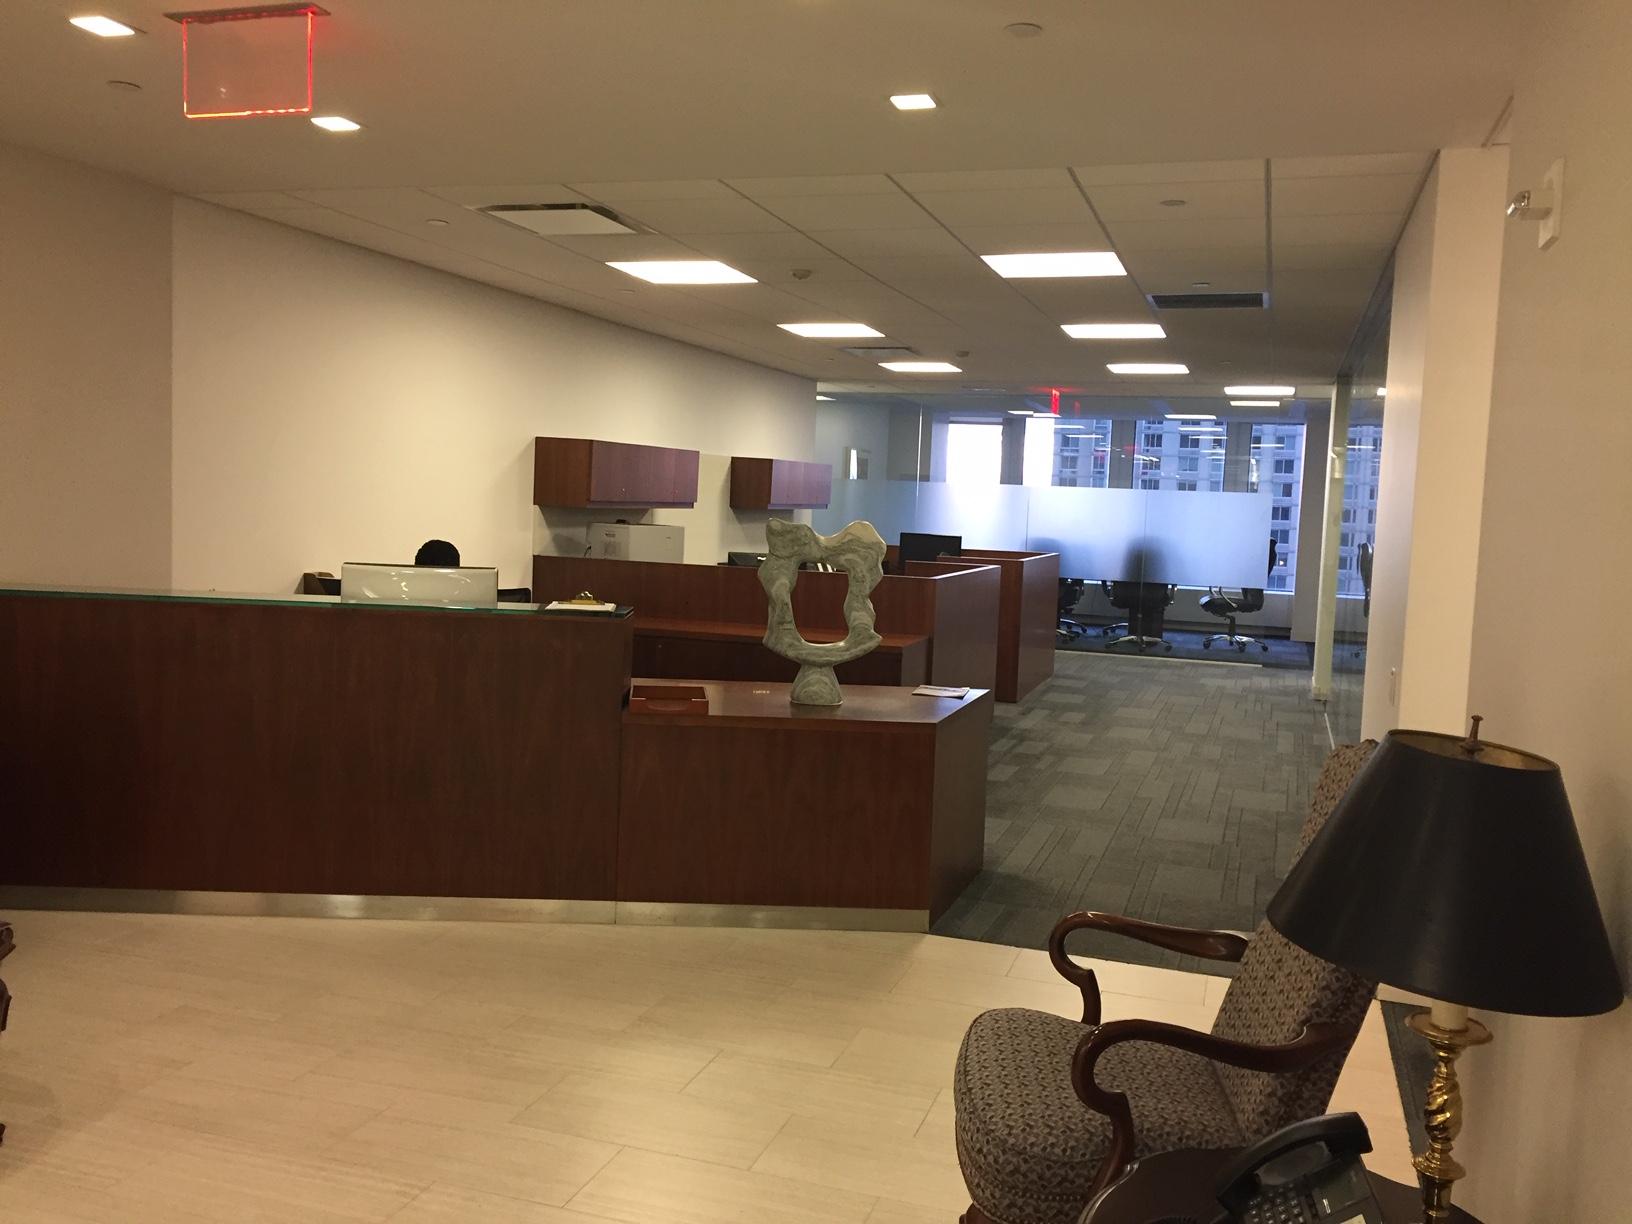 1700 Broadway (Part Time Use) New York NY High end reception area + Conference room